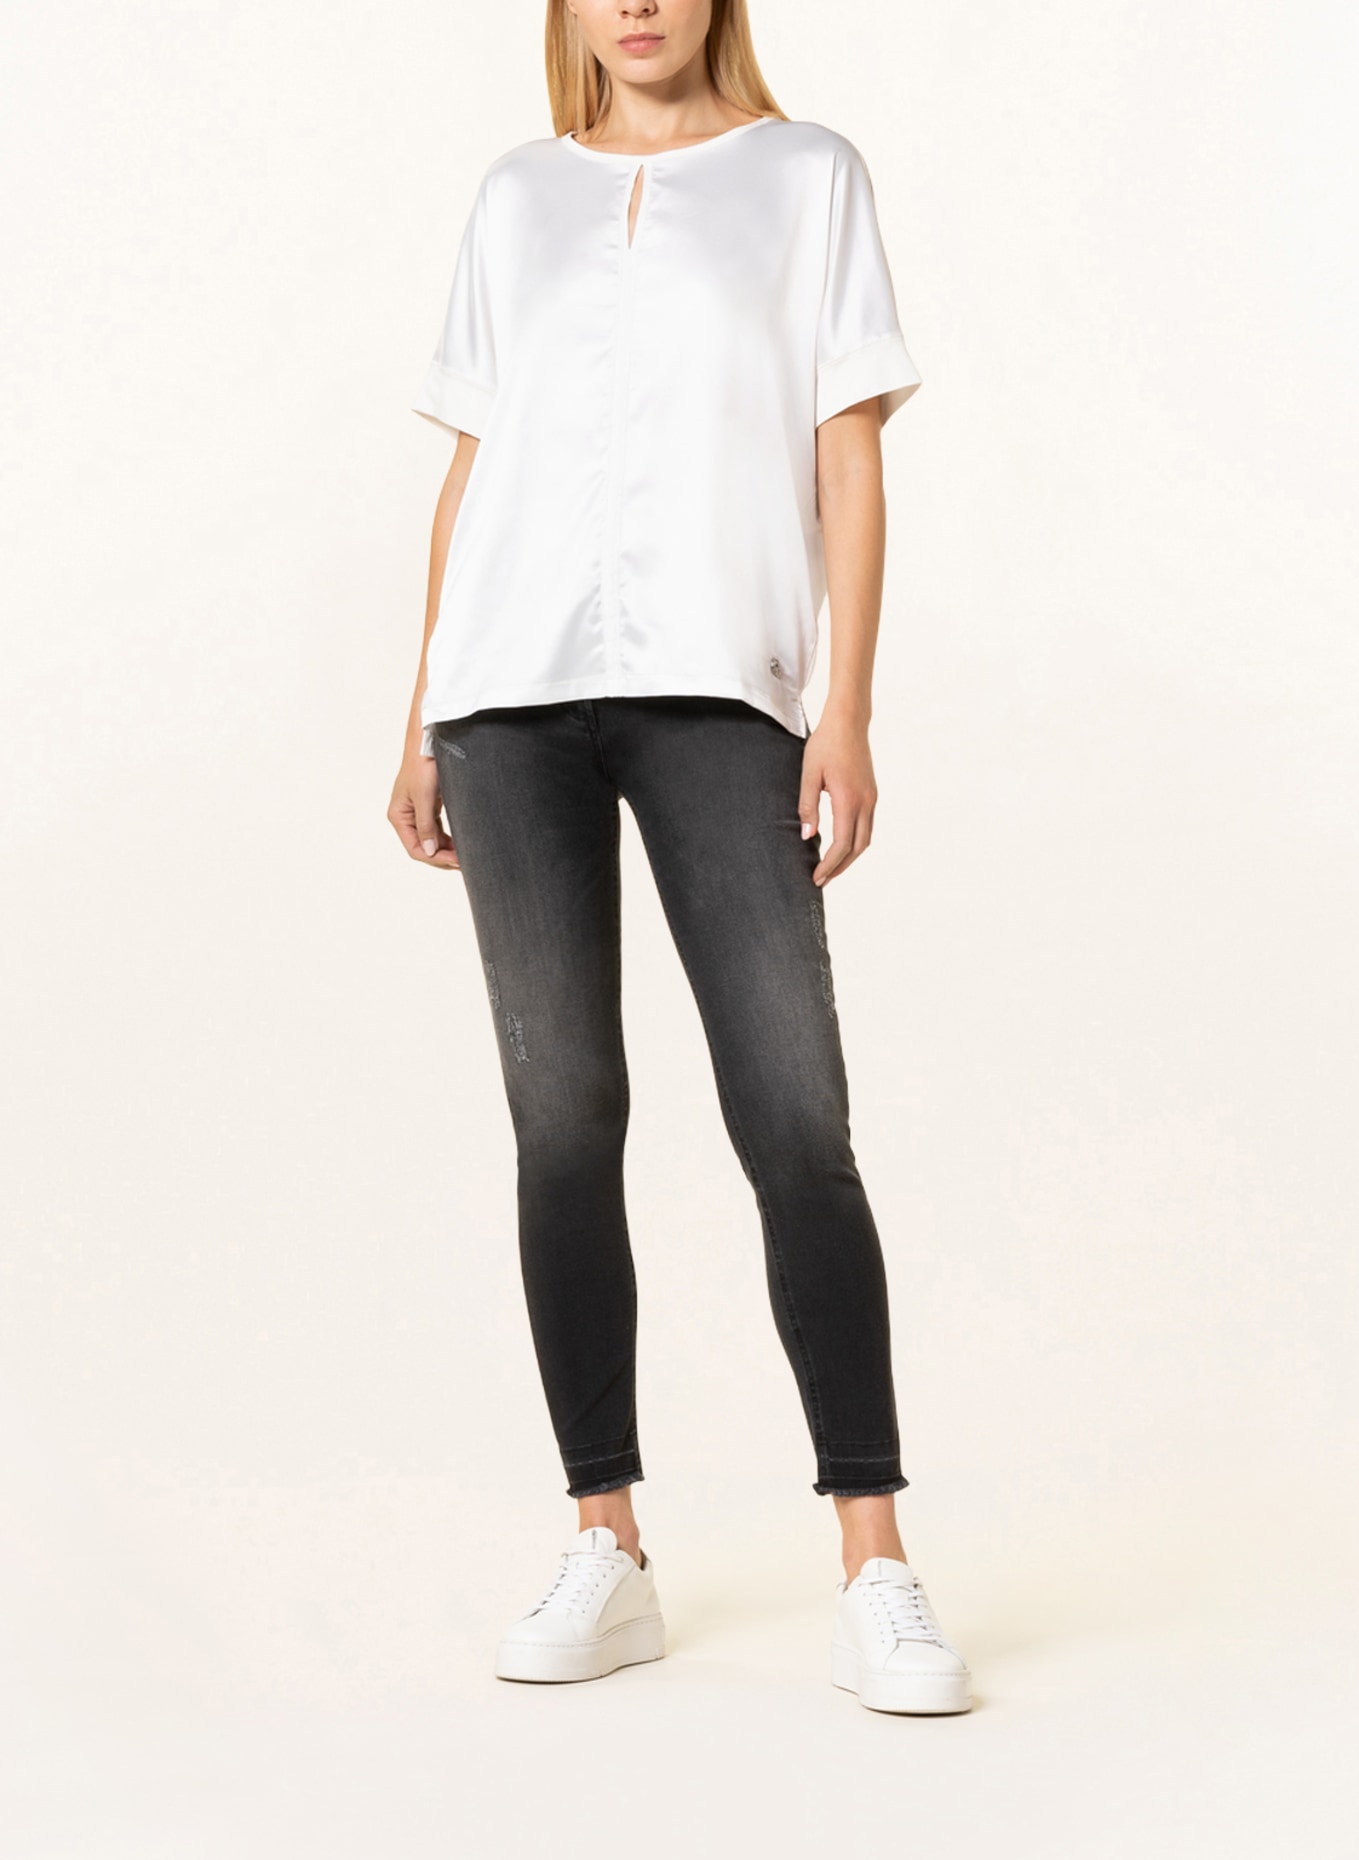 SPORTALM Blouse top in mixed materials, Color: WHITE (Image 2)